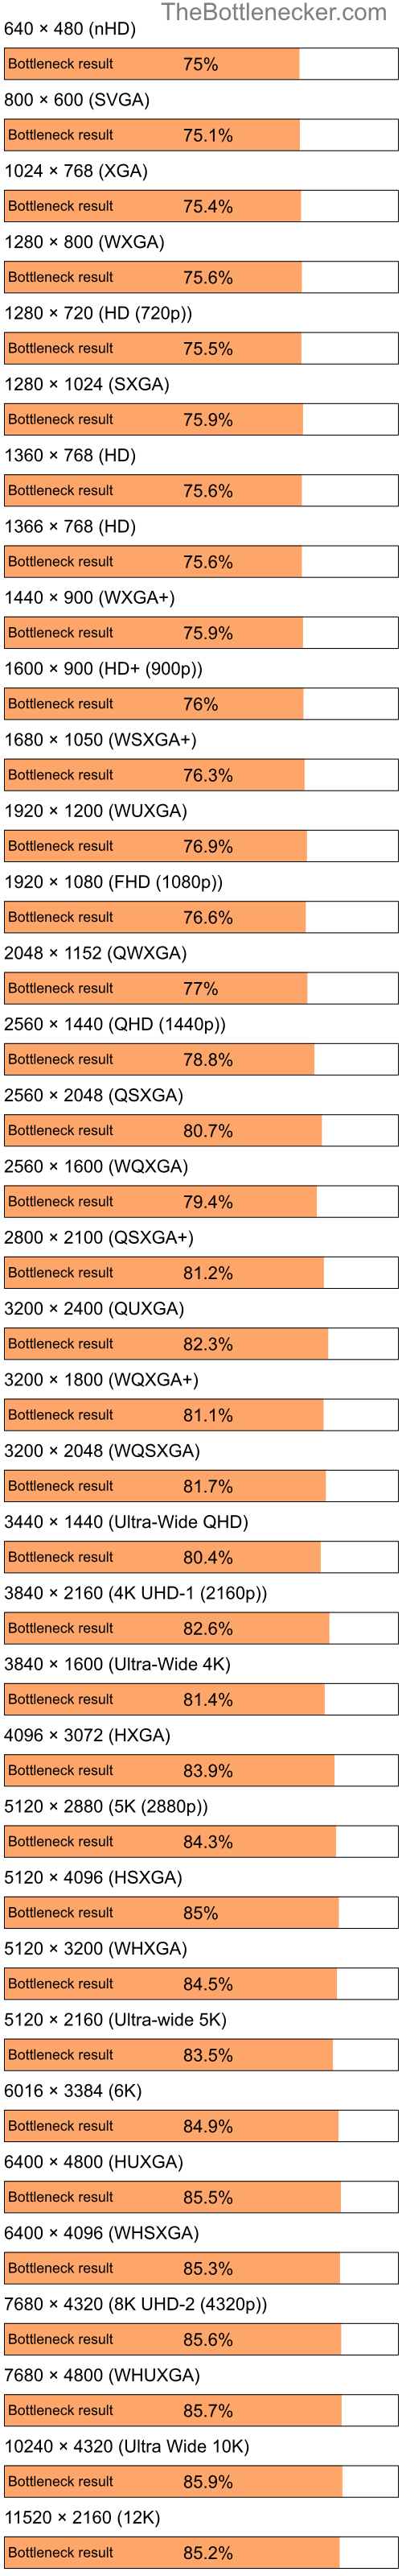 Bottleneck results by resolution for Intel Pentium 4 and NVIDIA GeForce Go 7400 in Graphic Card Intense Tasks